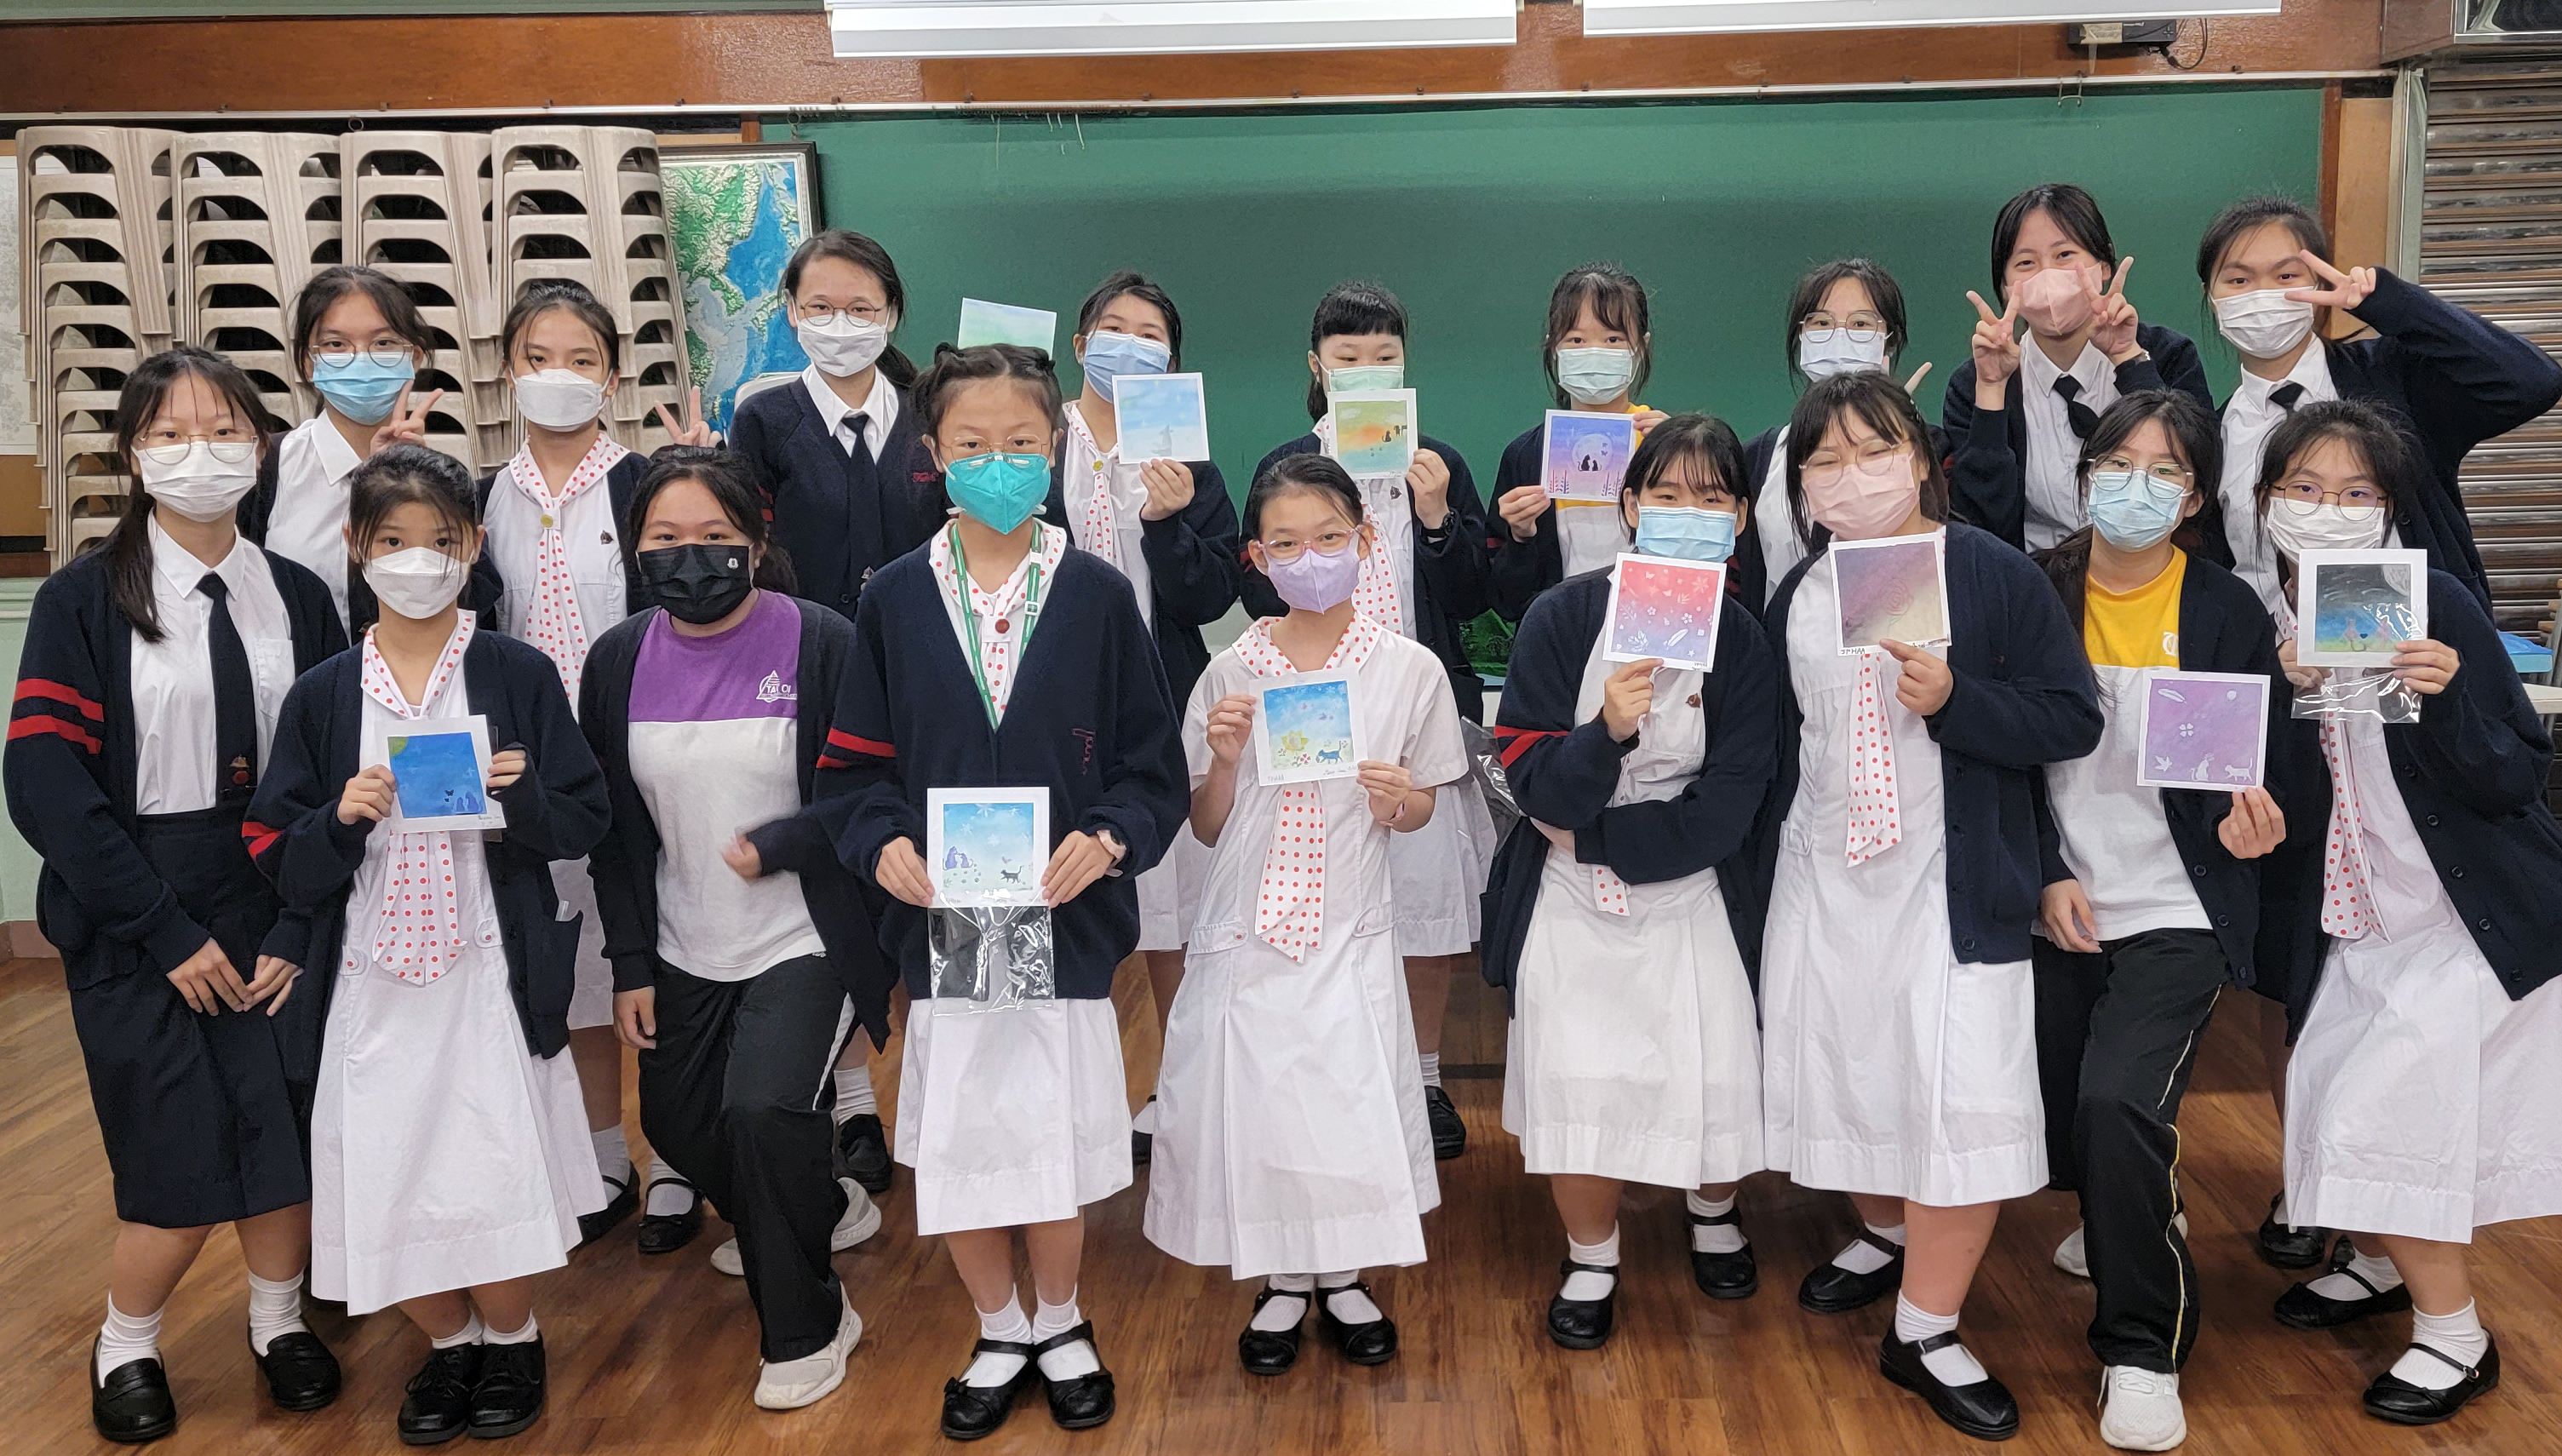 A group of students wearing masksDescription automatically generated